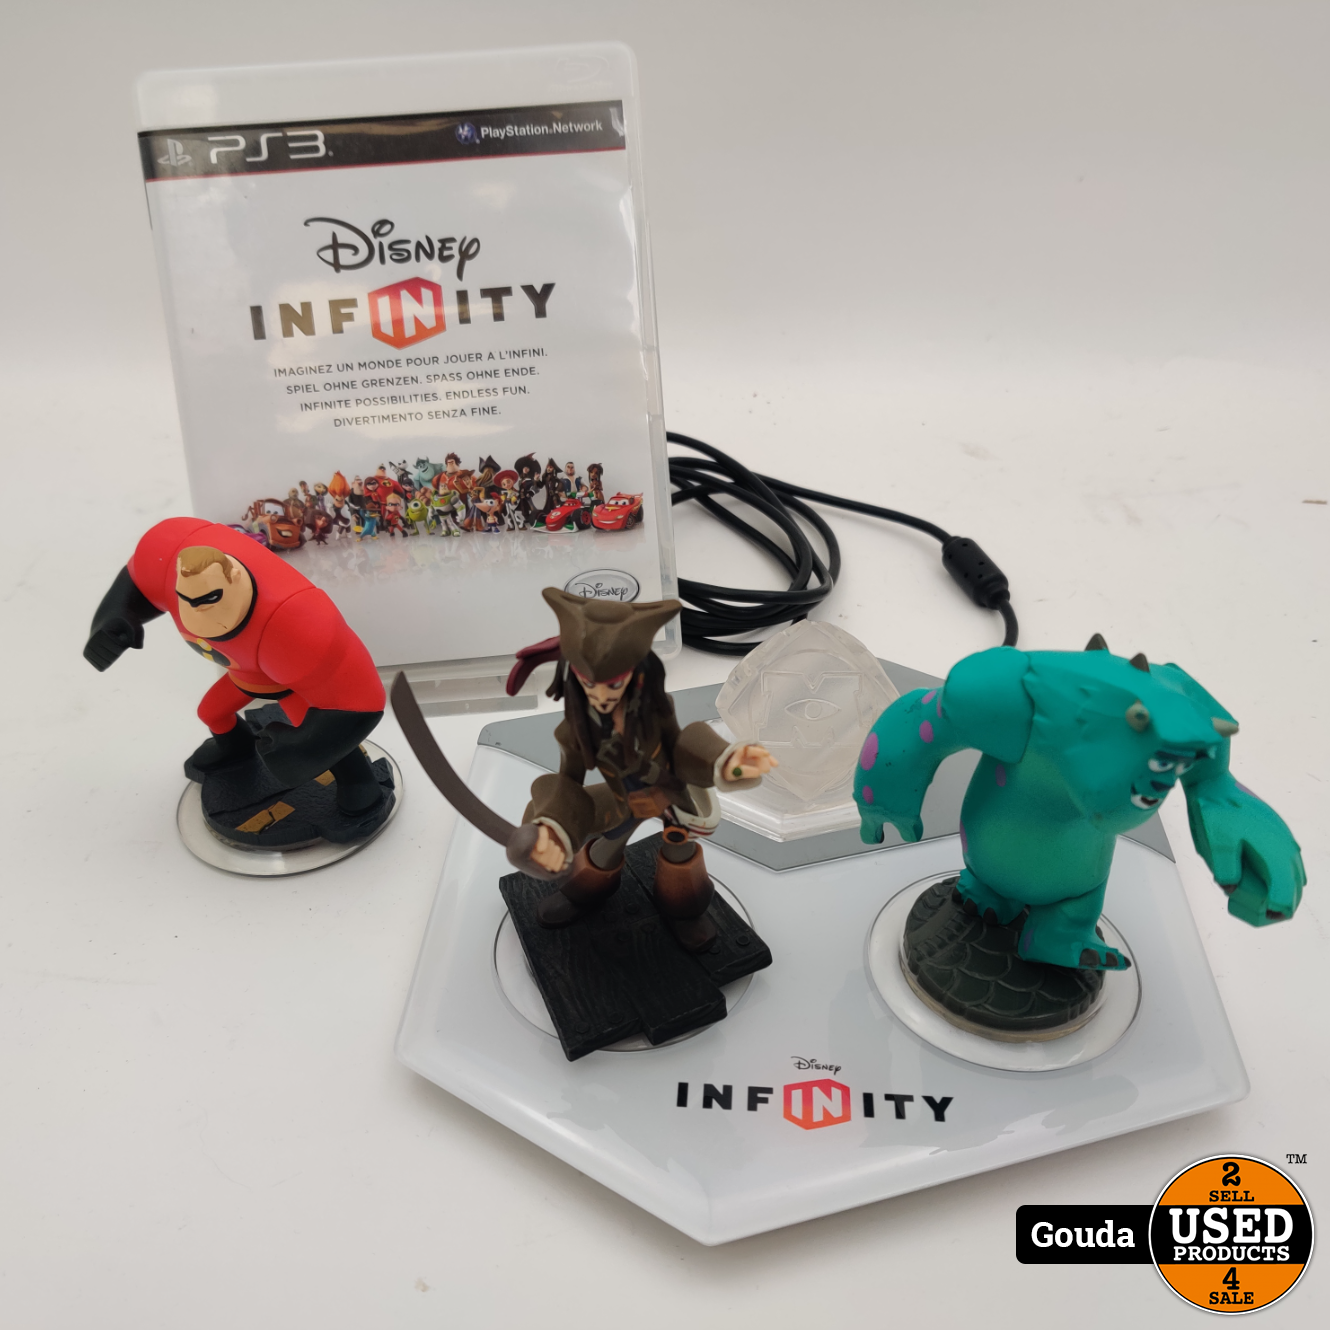 Disney Infinity Starter Pack PS3 - Used Products